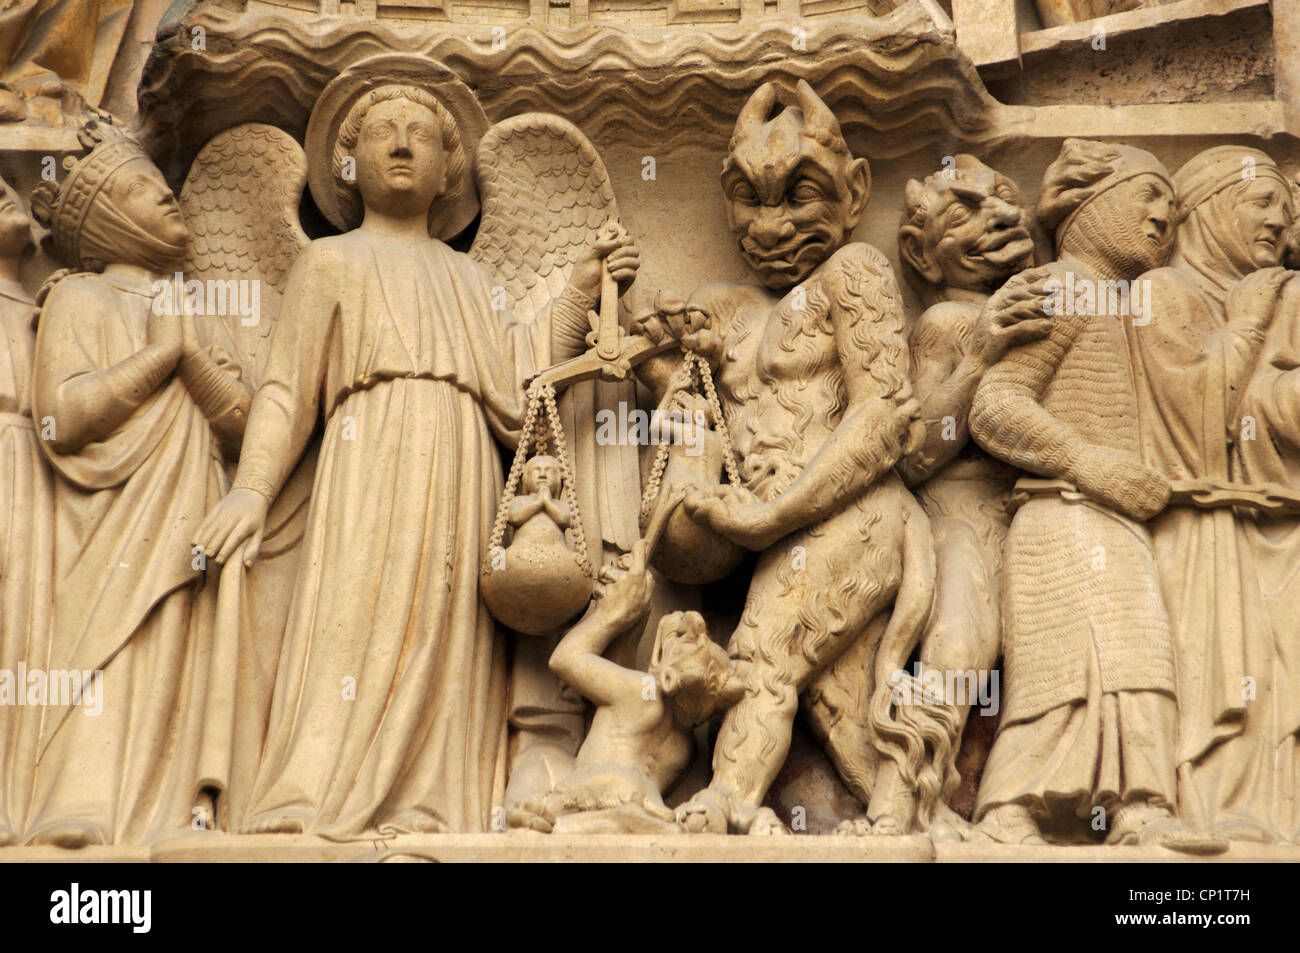 Gothic Art. France. Paris. Notre Dame. Portal of the Last Judgment. The archangel Michael is weighing their souls with Devil. Stock Photo